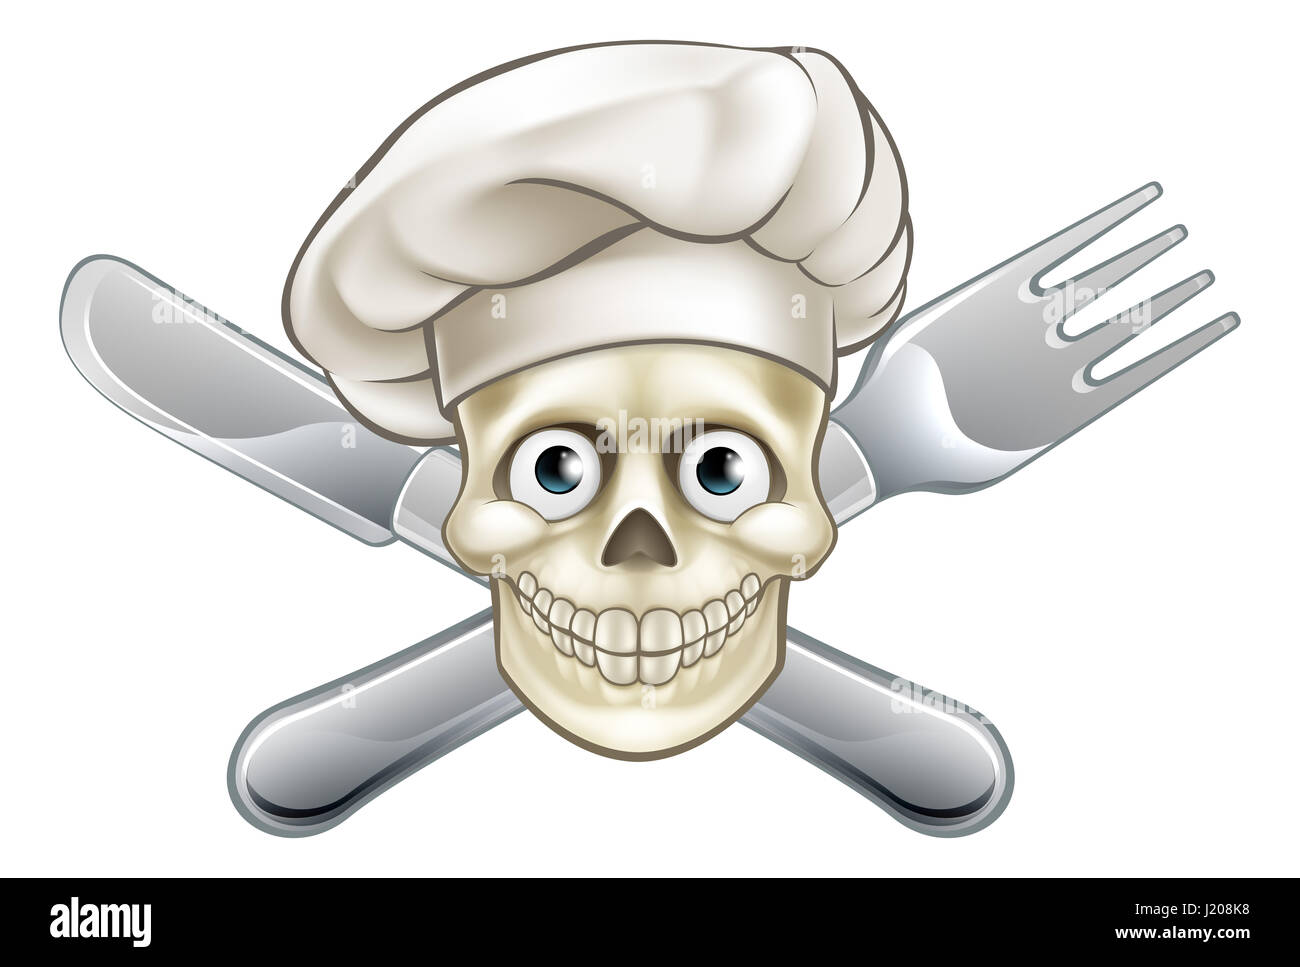 Cartoon chef pirate skull and crossbones with cross knife and fork and hat Stock Photo